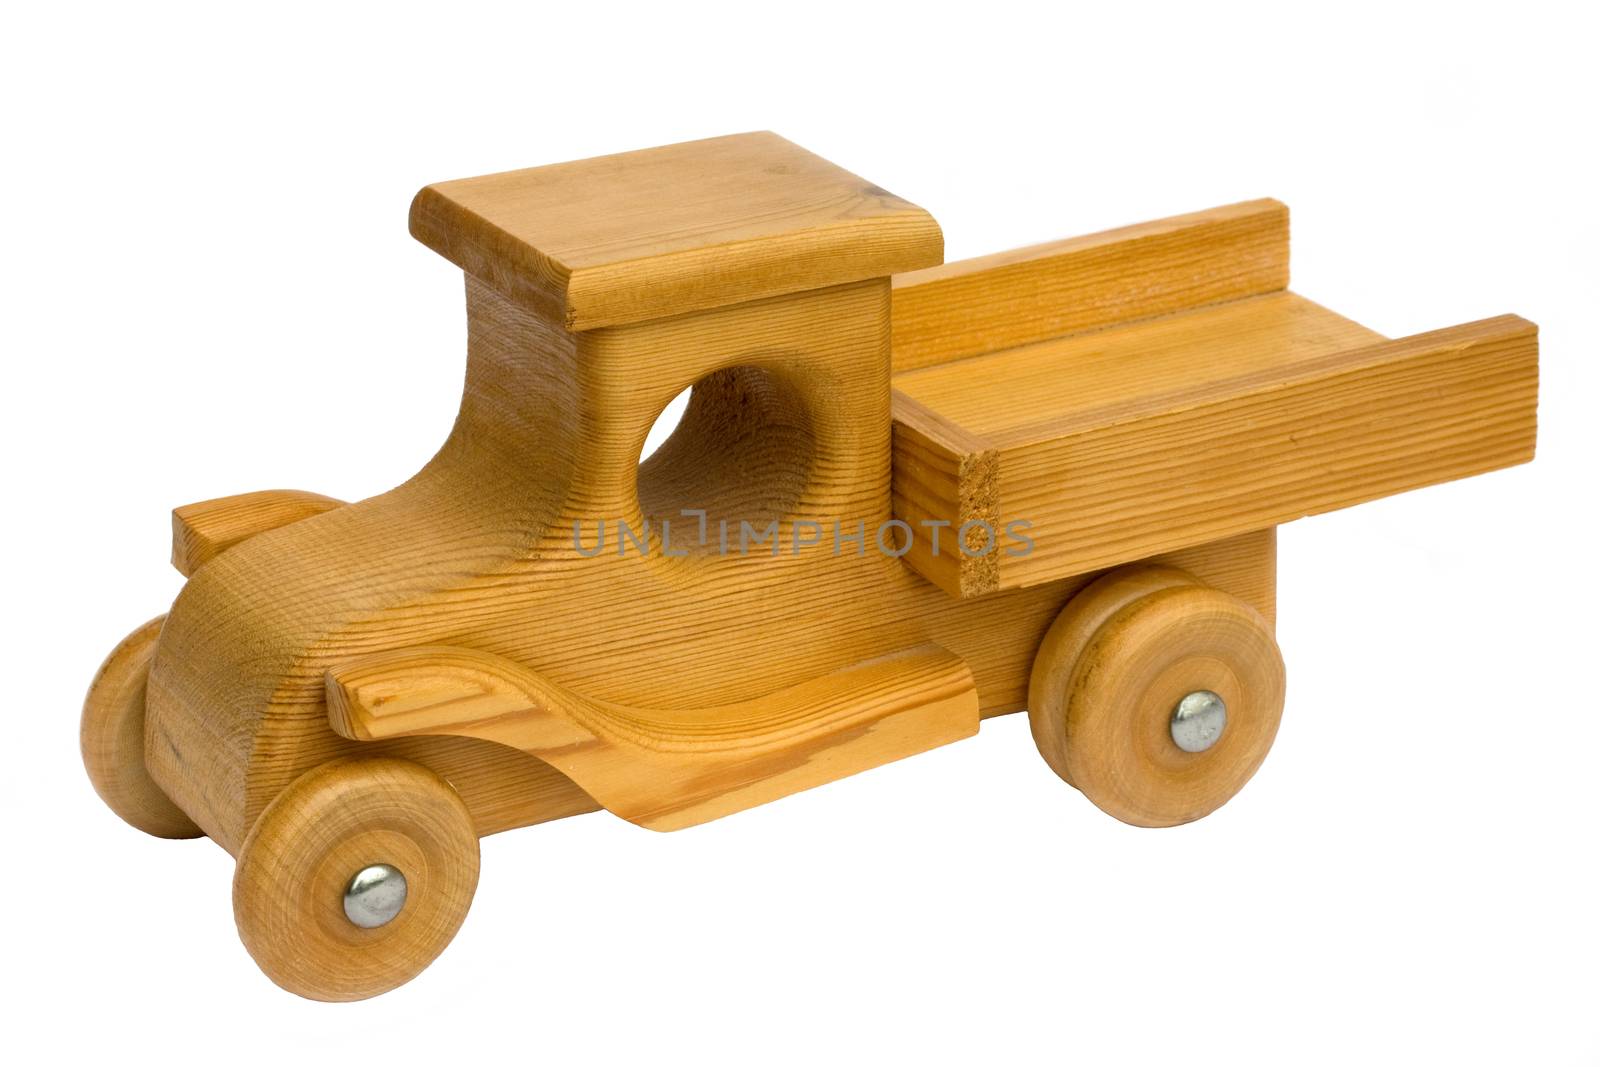 Old homemade wooden toy truck isolated on white